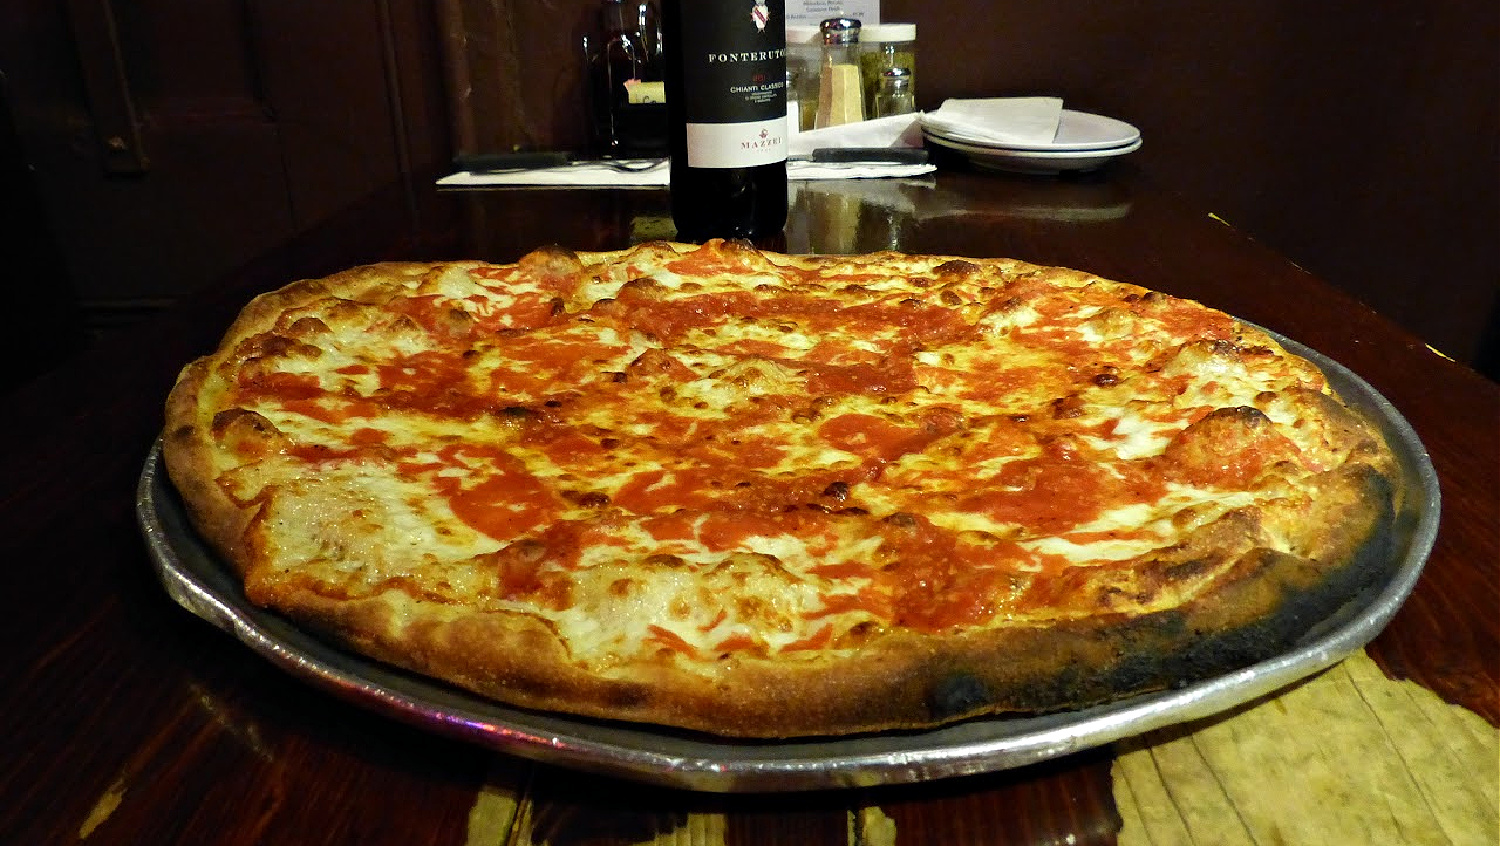 Arturo's pizza is a great option for dining when you're traveling solo in new york